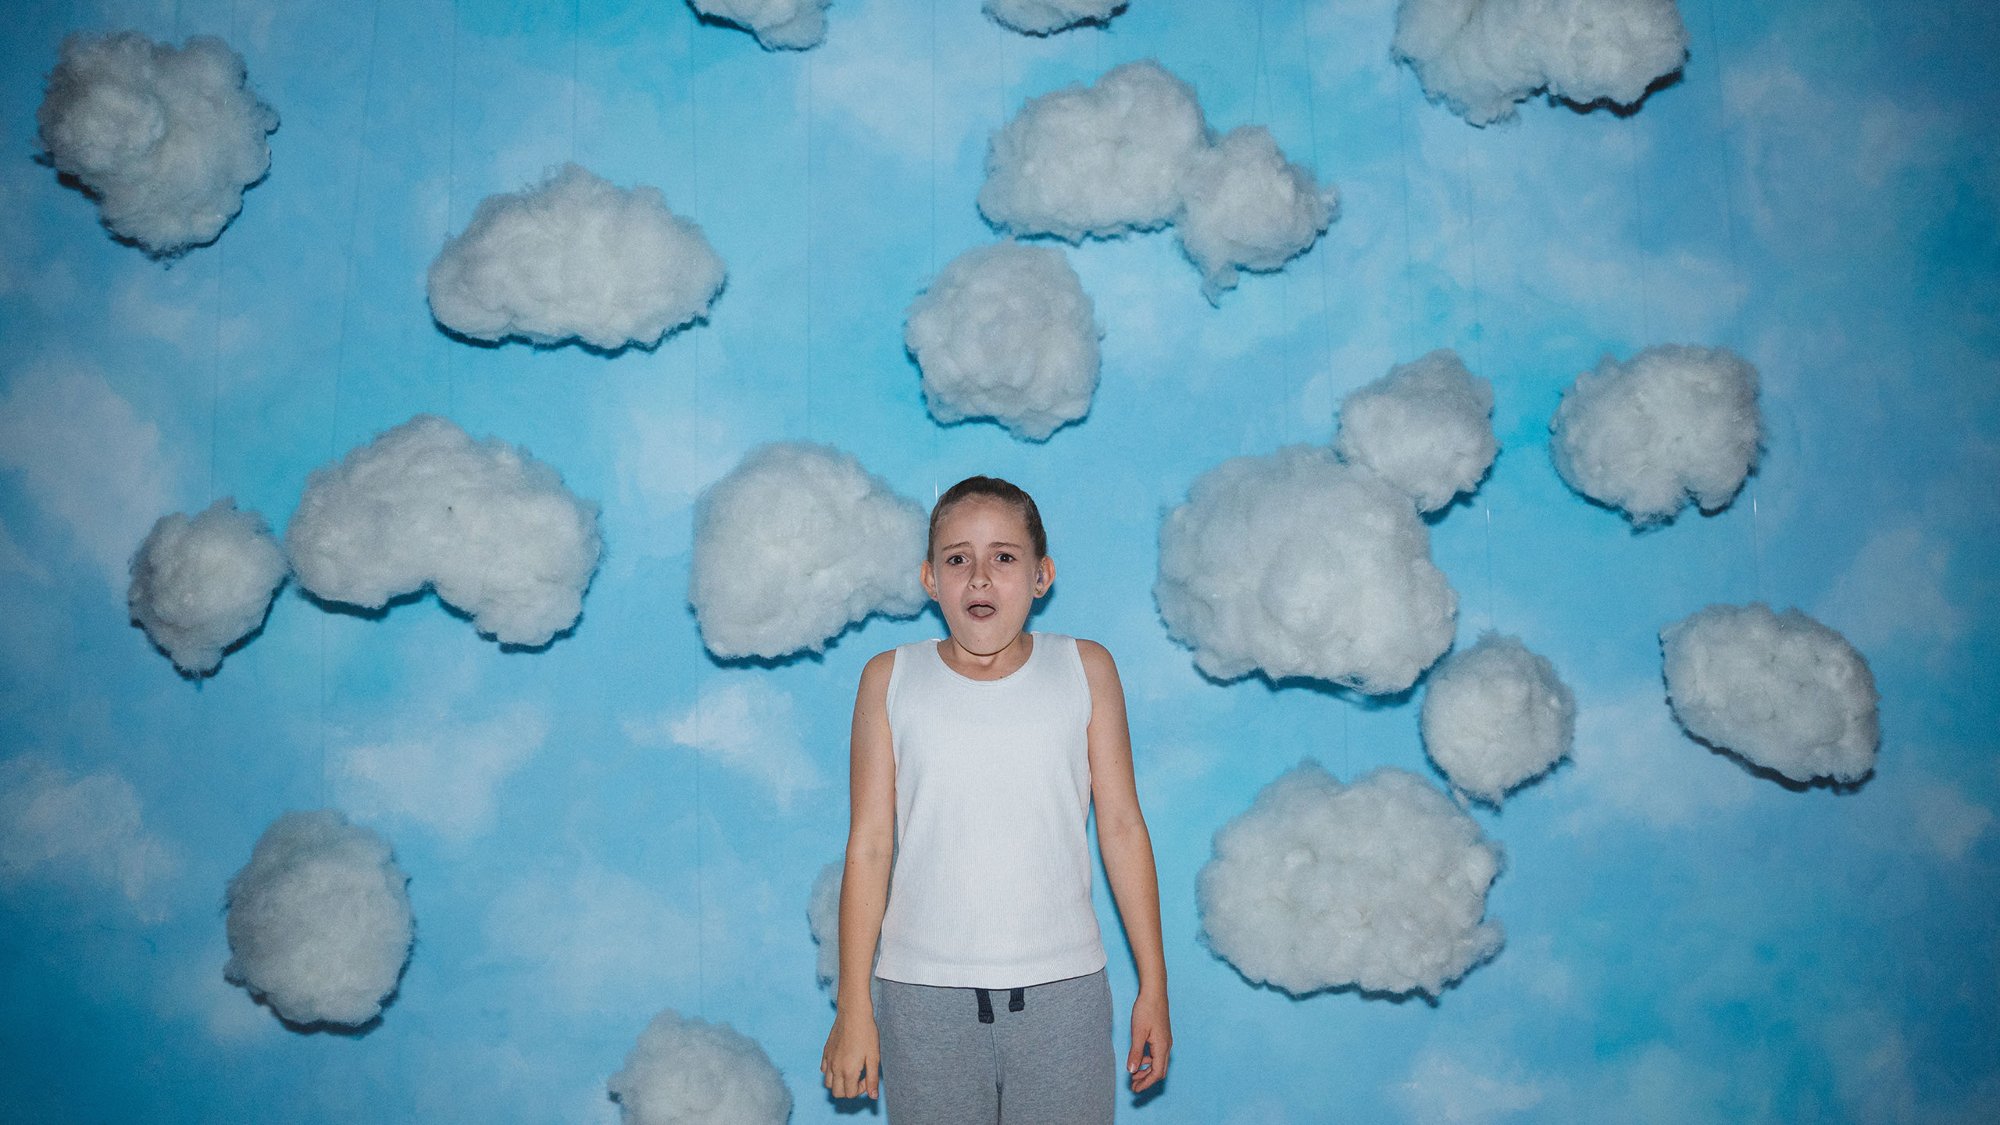 'Scrapper' Lola Campbell as Georgie with her mouth open against a cloud-filled background